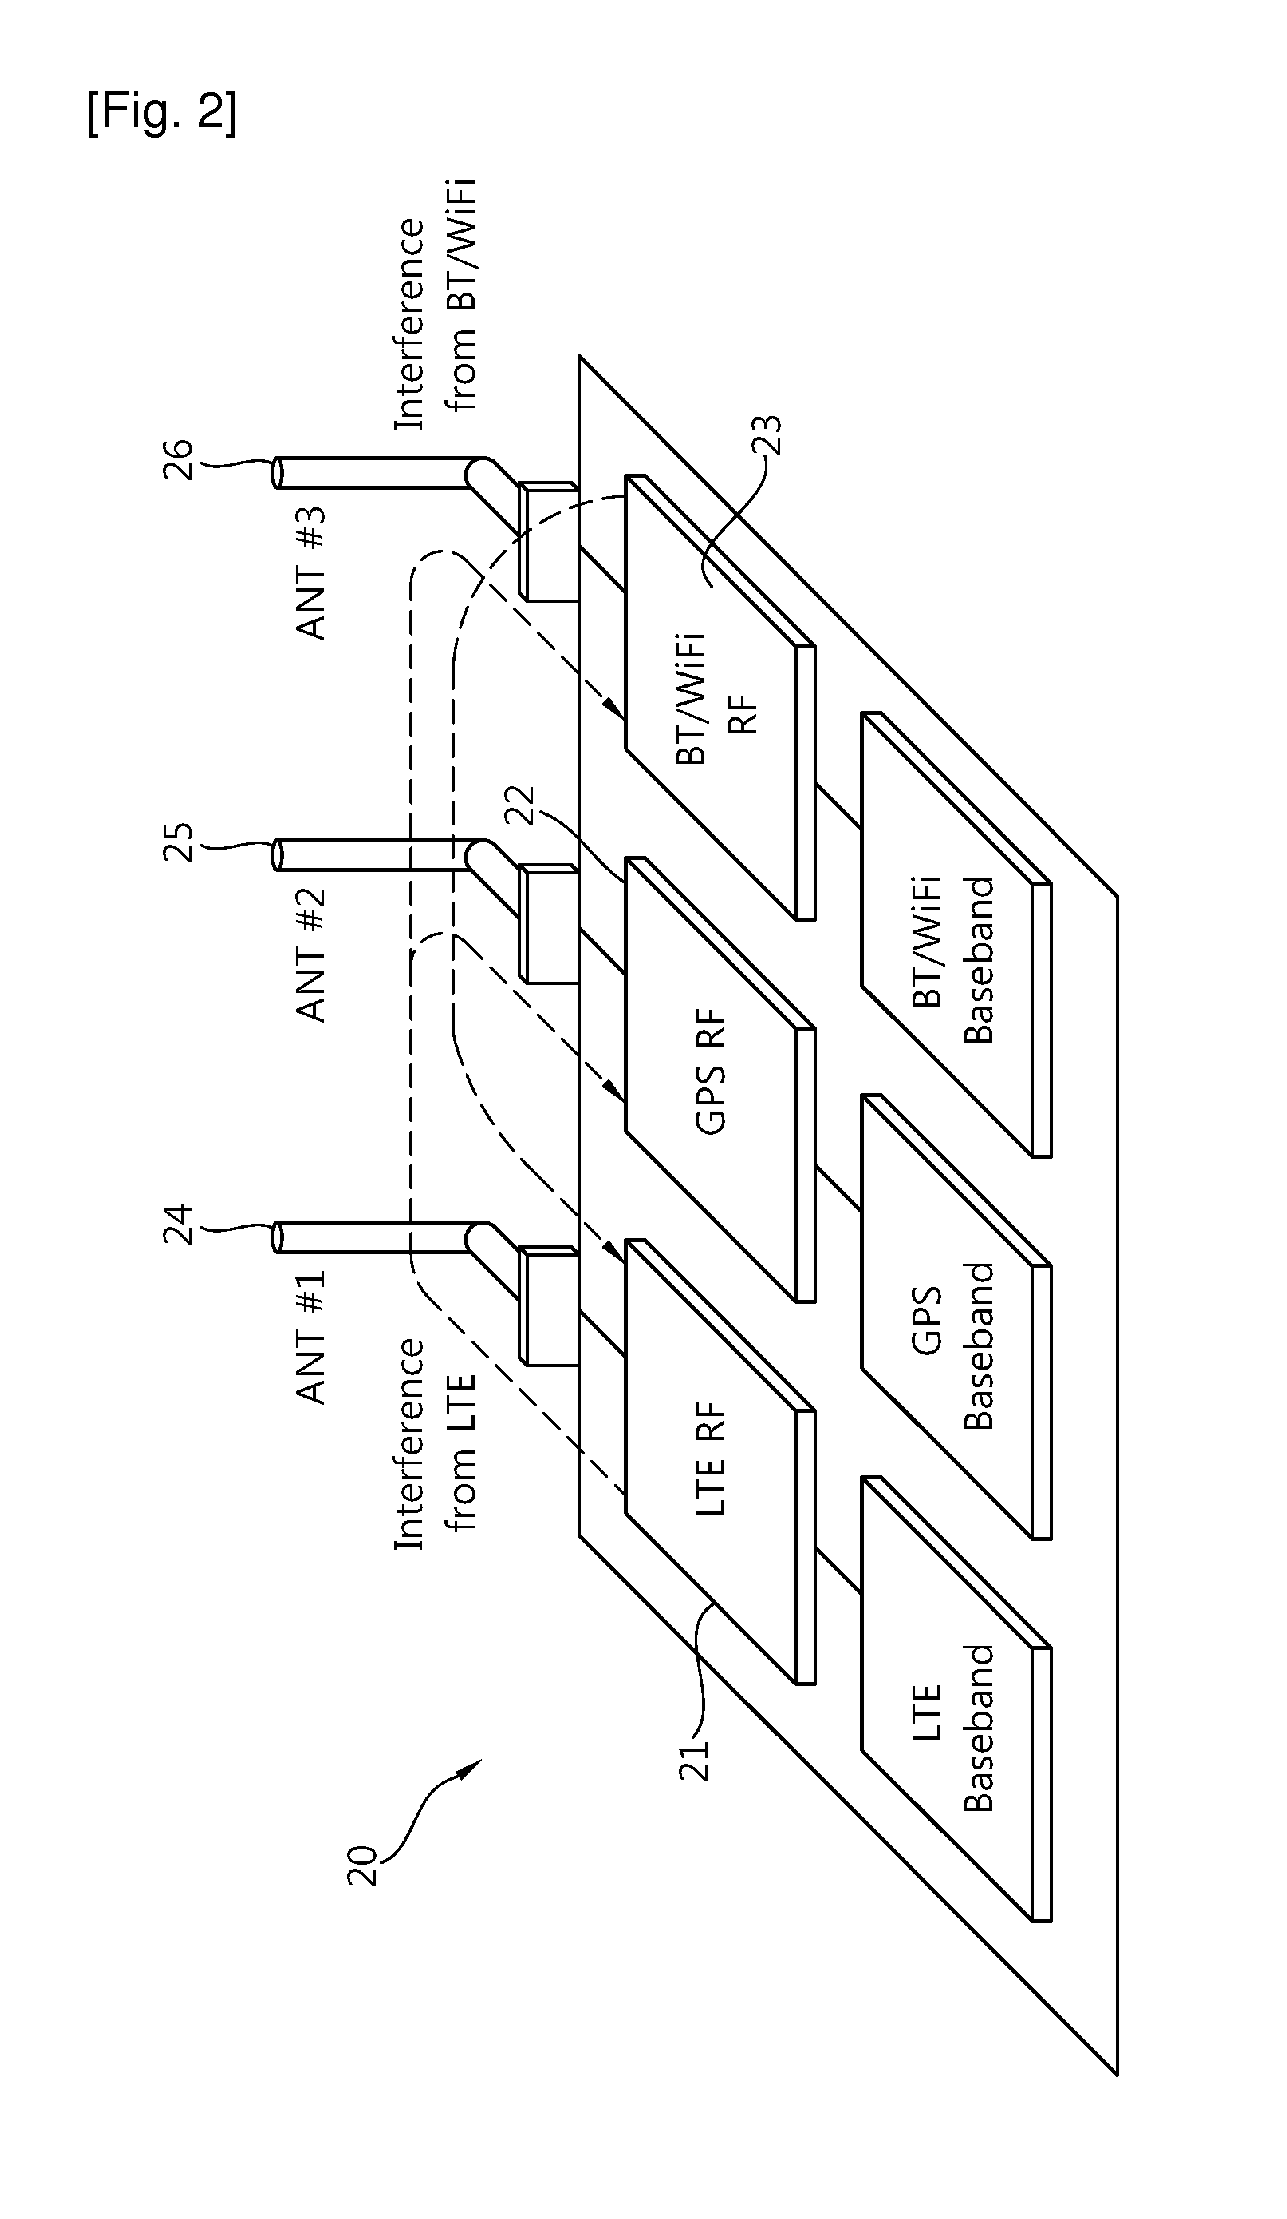 Apparatus and method for performing measurement report considering in-device coexistence interference